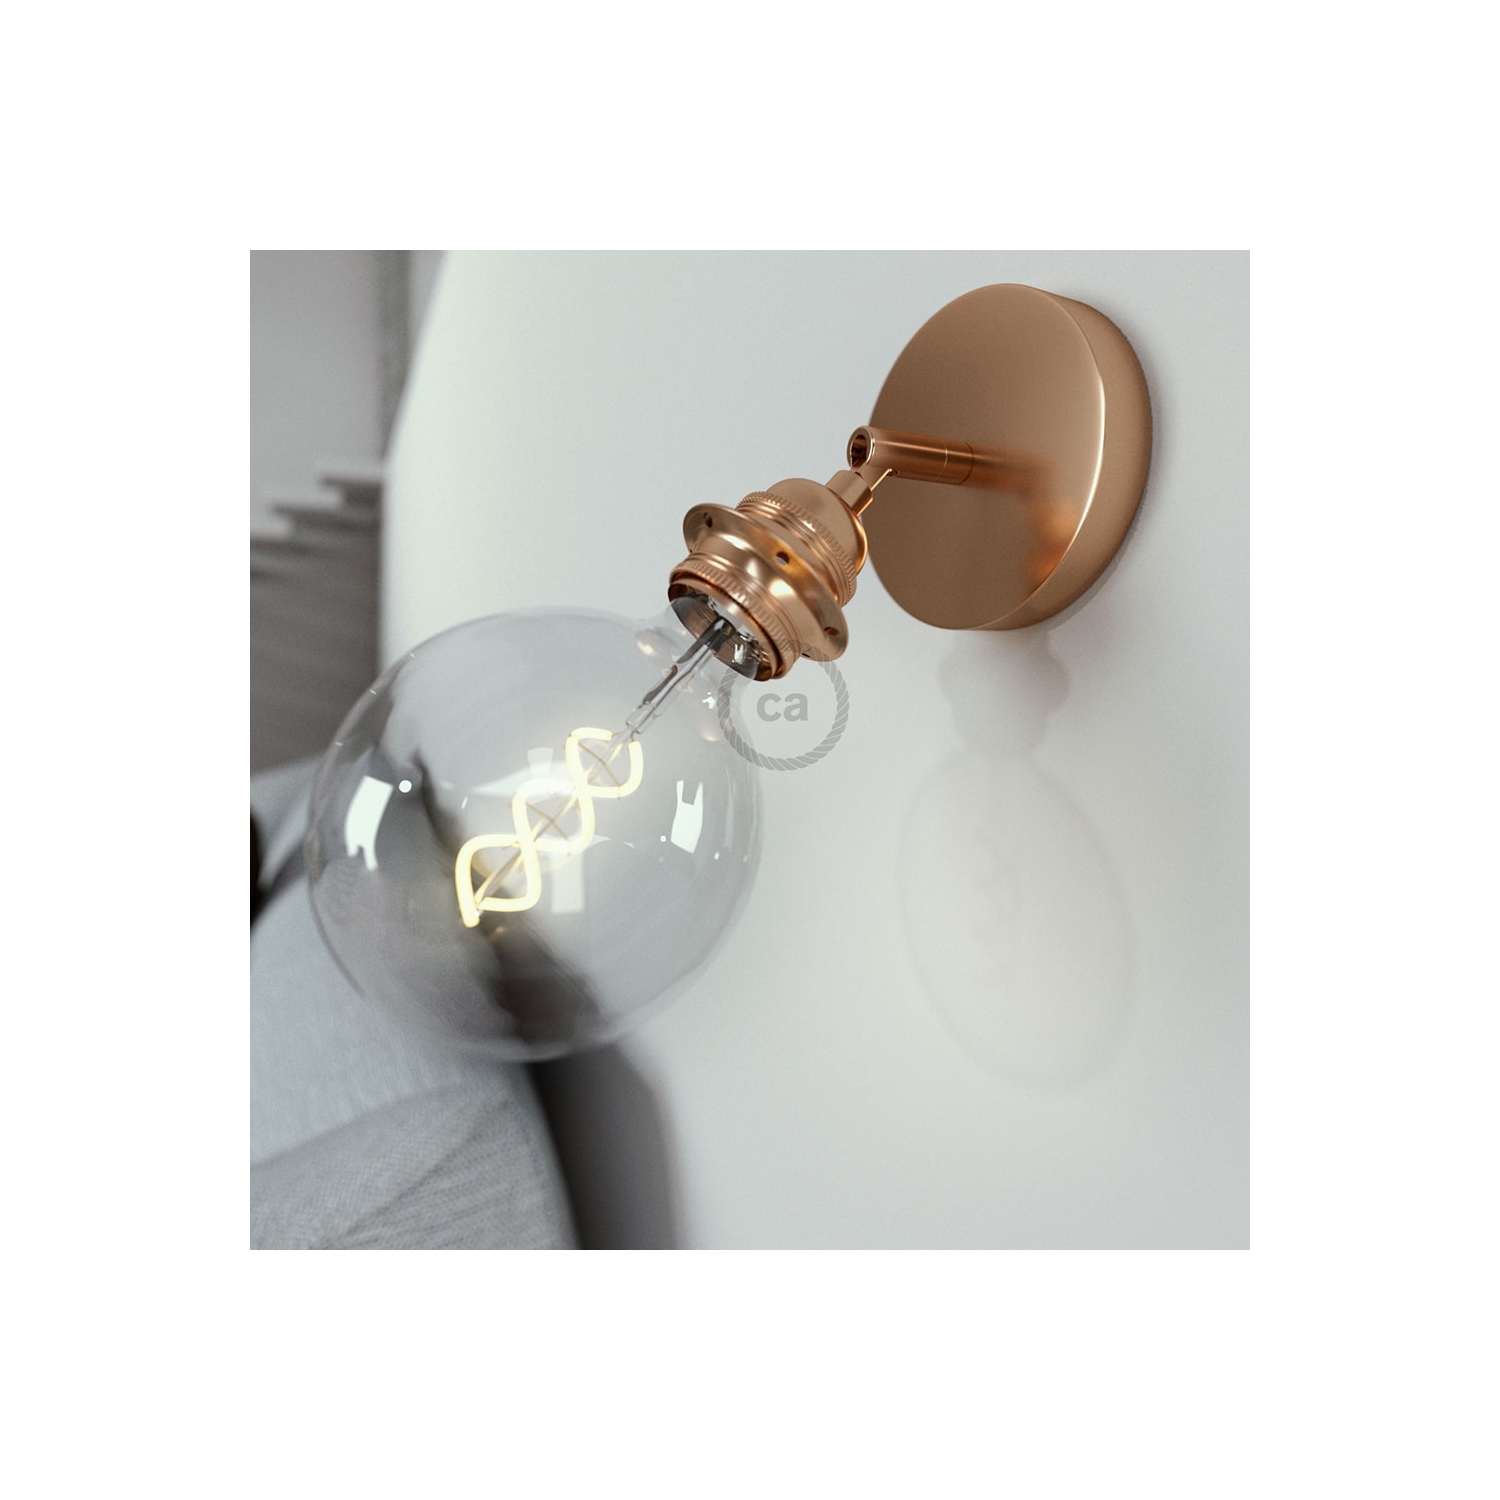 Fermaluce Metallo 90° Copper finish adjustable, with E26 threaded lamp holder, the metal wall or ceiling light source